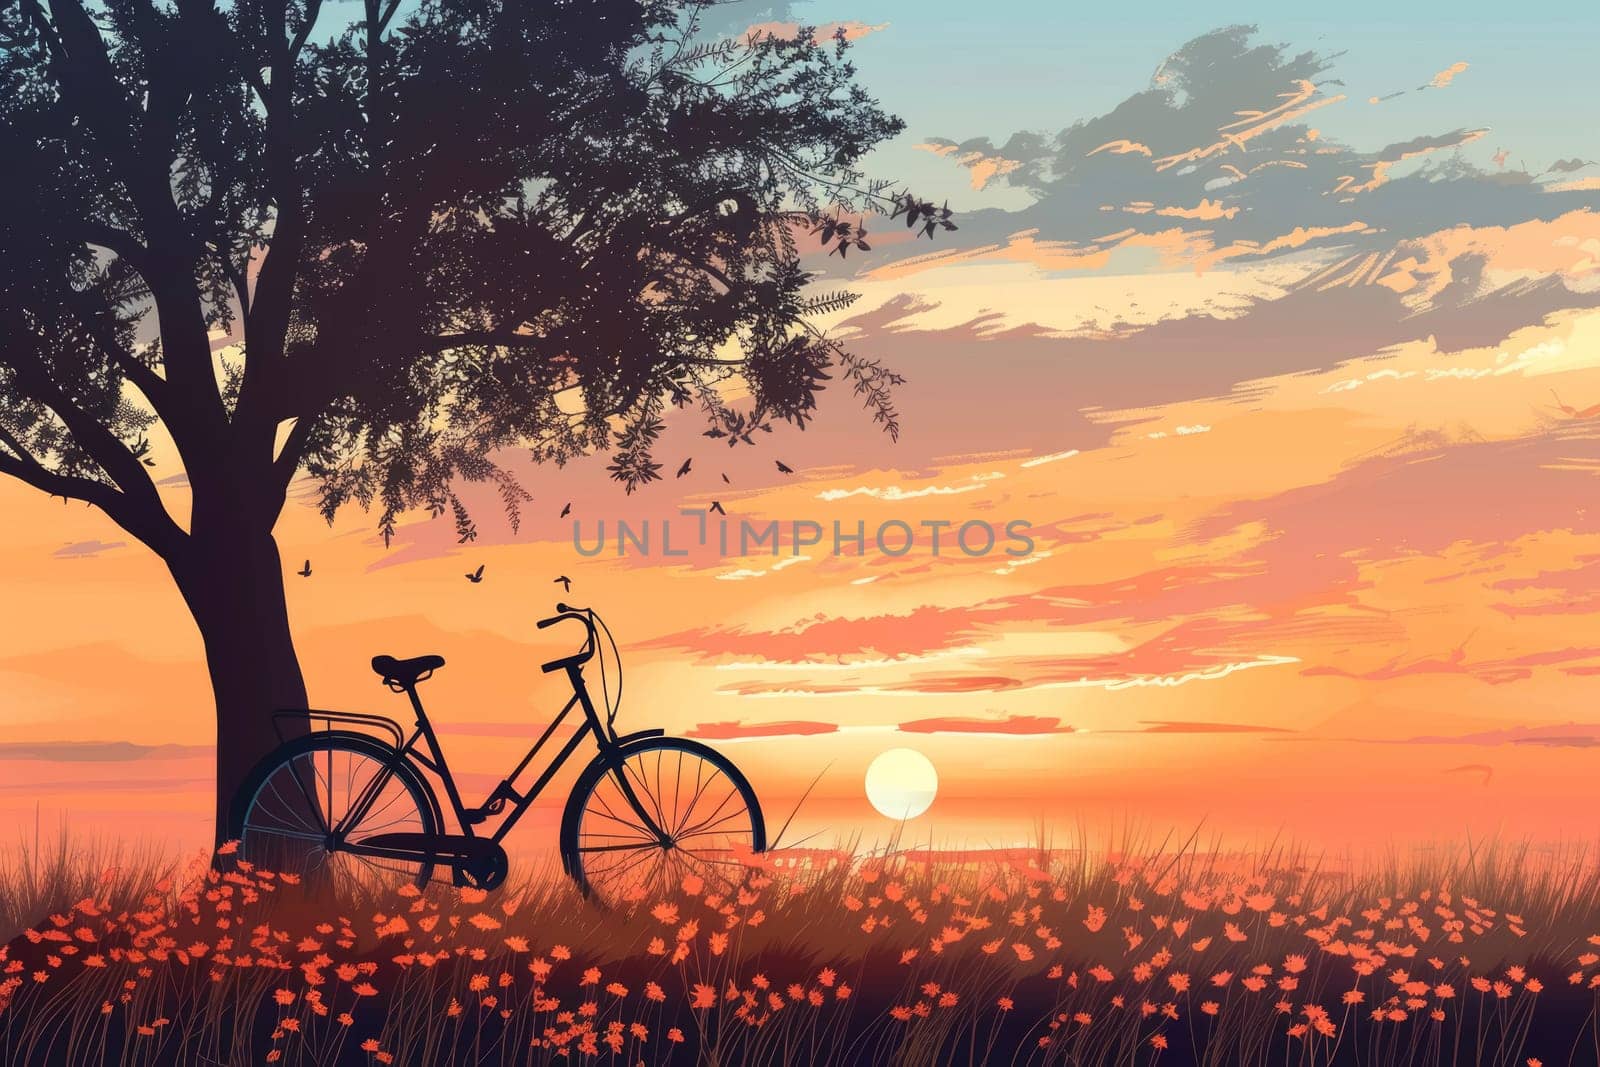 A tranquil scene unfolds with a bicycle resting against a silhouetted tree at sunset. The sky is a vibrant tapestry of warm colors as dusk approaches.